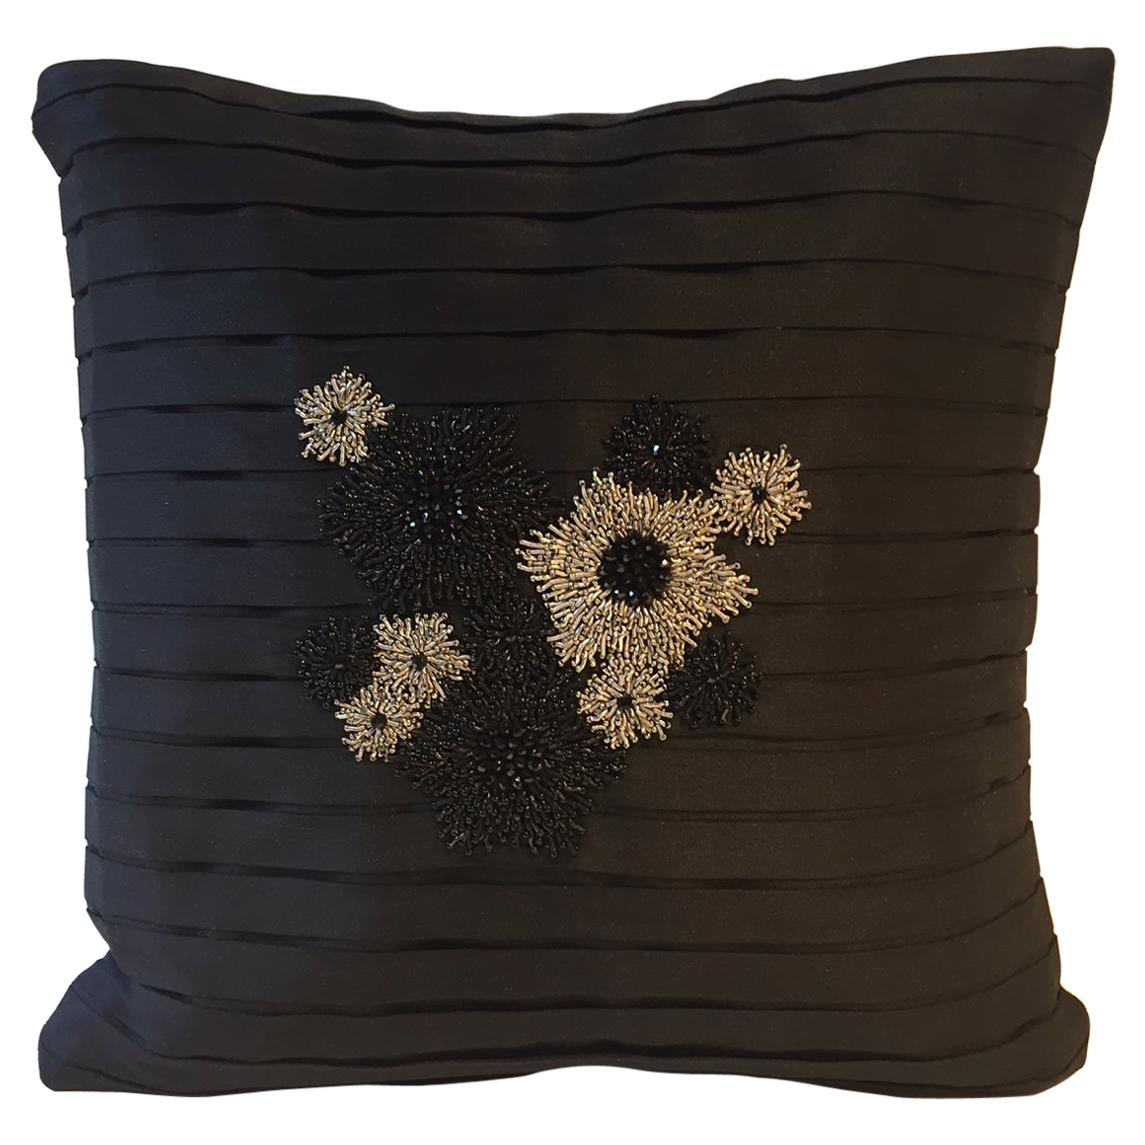 Cushion Floral Hand Embroidery on Pleated Black Silk